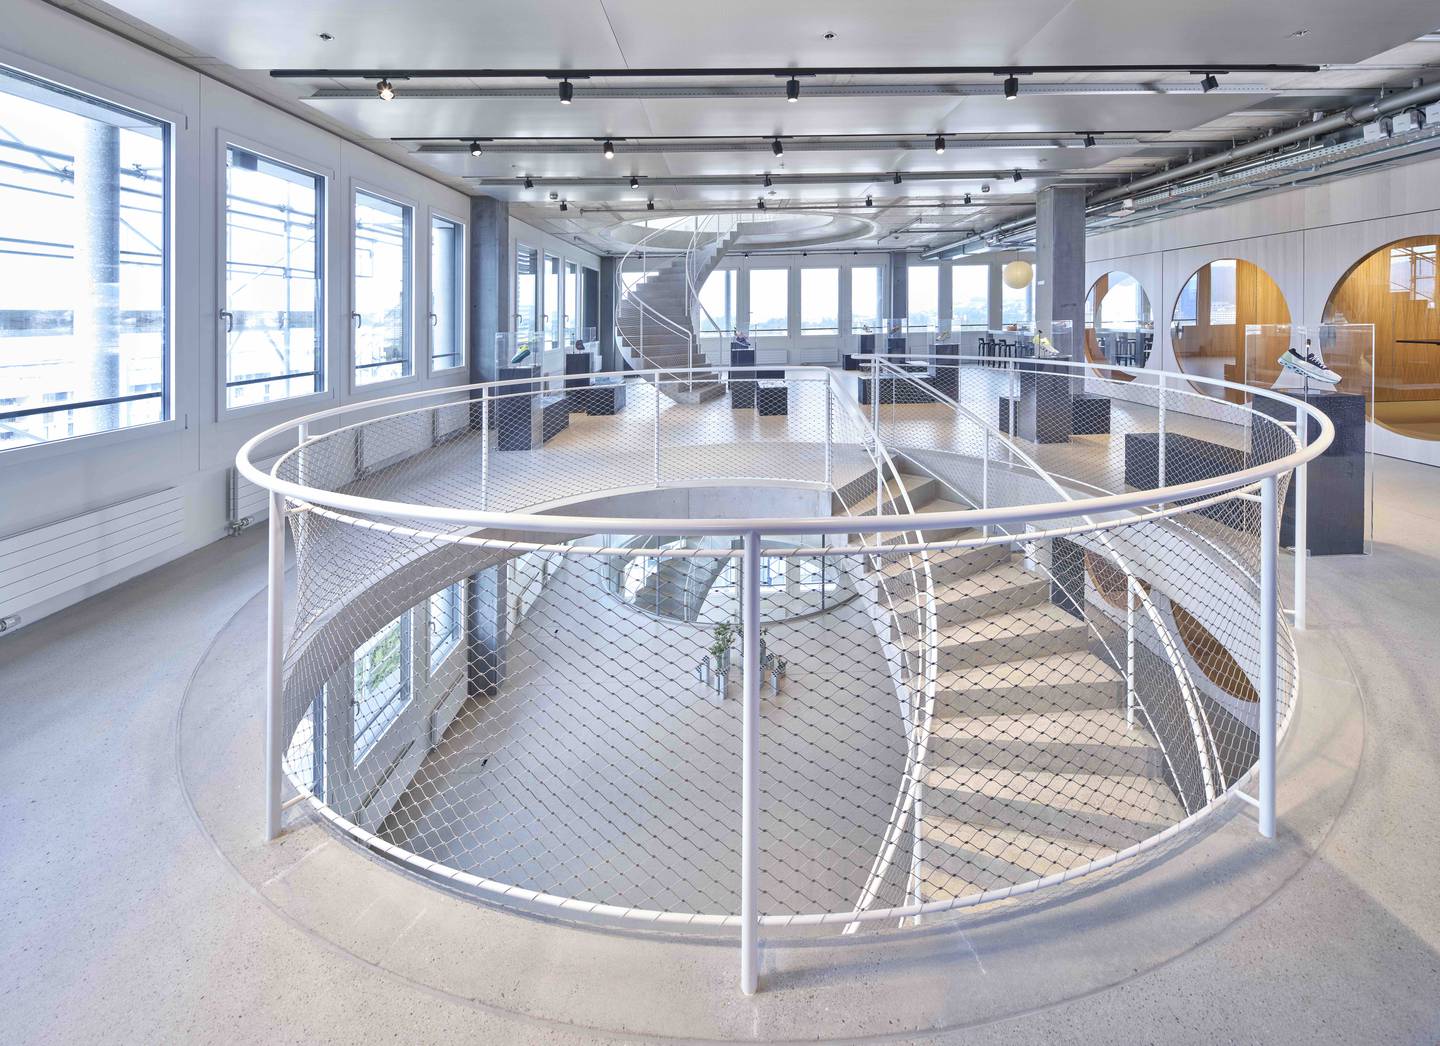 On, the running shoe brand based in Zurich, Switzerland, opened its new 17-floor office space this year outfitted with a central stairway dubbed "The Trail."